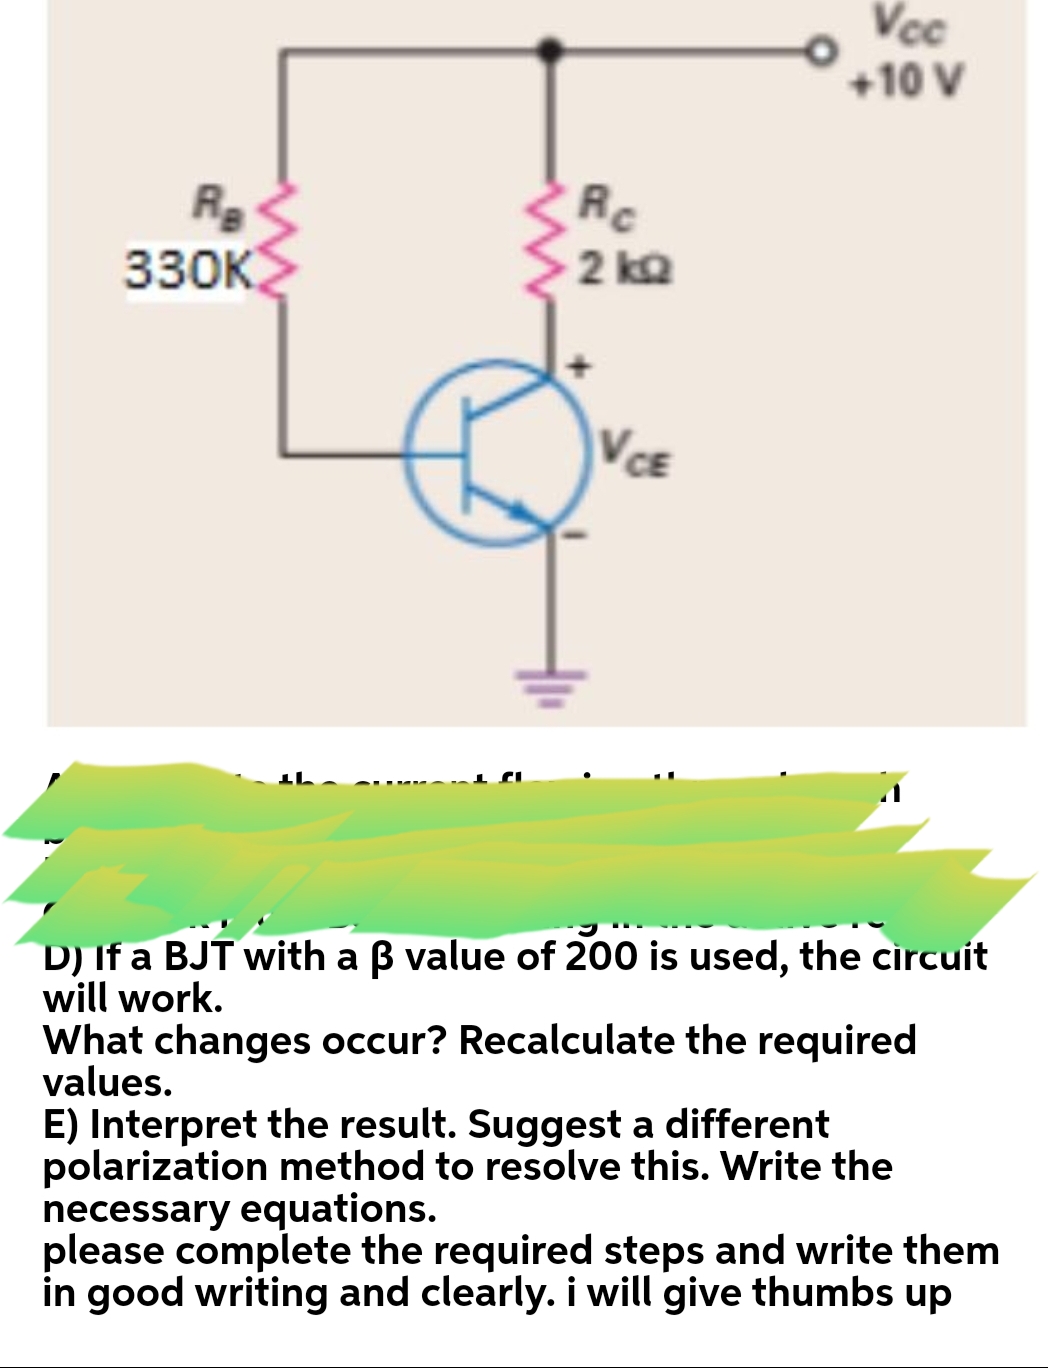 Vcc
+10 V
Rc
330к
2 ka
VCE
D) If a BJT with a B value of 200 is used, the circuit
will work.
What changes occur? Recalculate the required
values.
E) Interpret the result. Suggest a different
polarization method to resolve this. Write the
necessary equations.
please complete the required steps and write them
in good writing and clearly. i will give thumbs up
